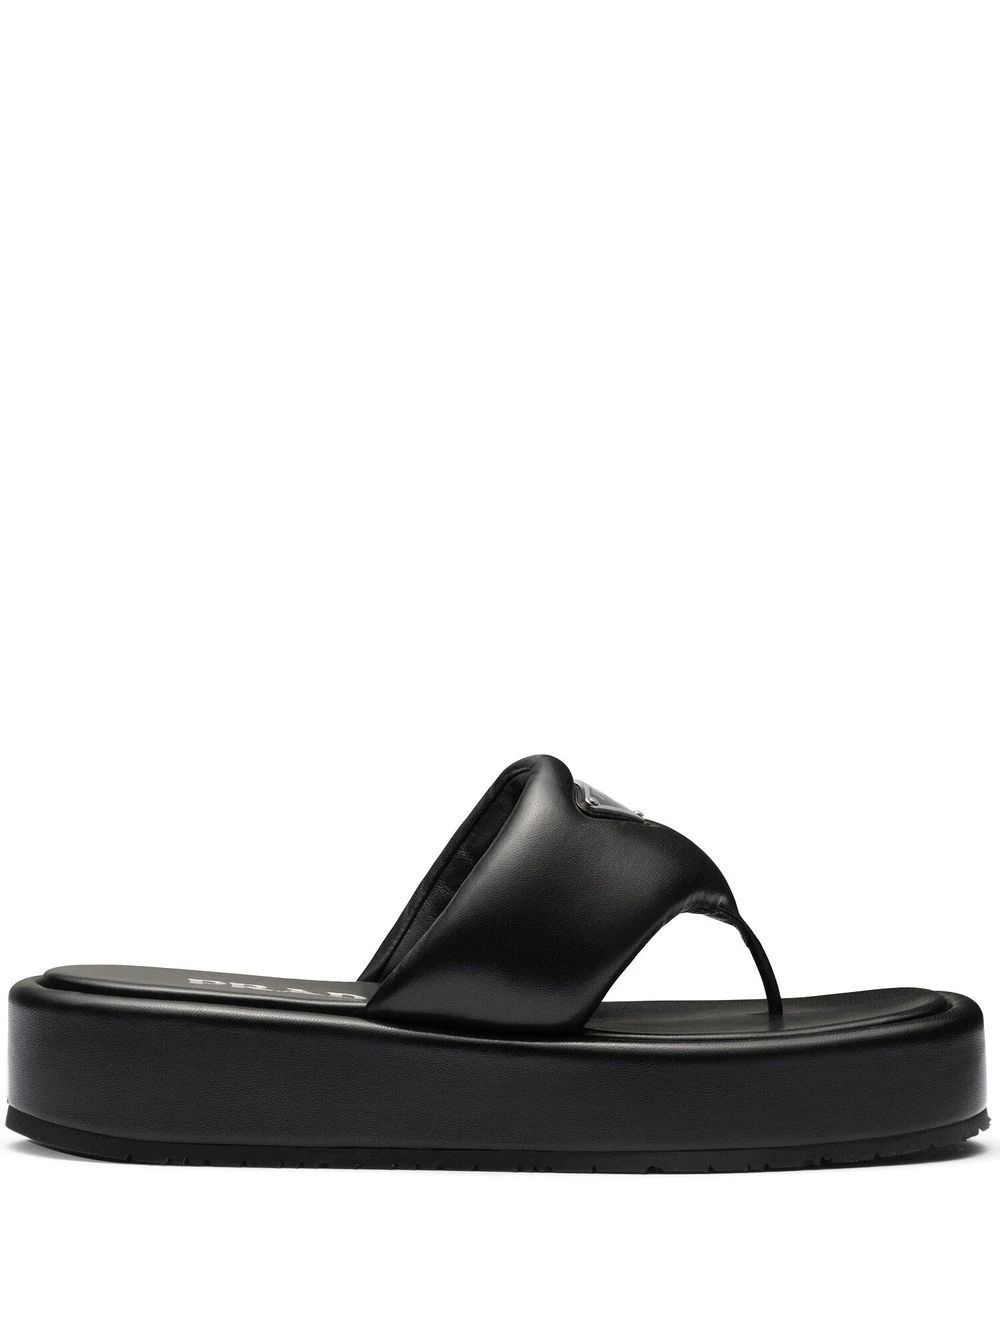 Soft padded nappa leather sandals | Farfetch Global